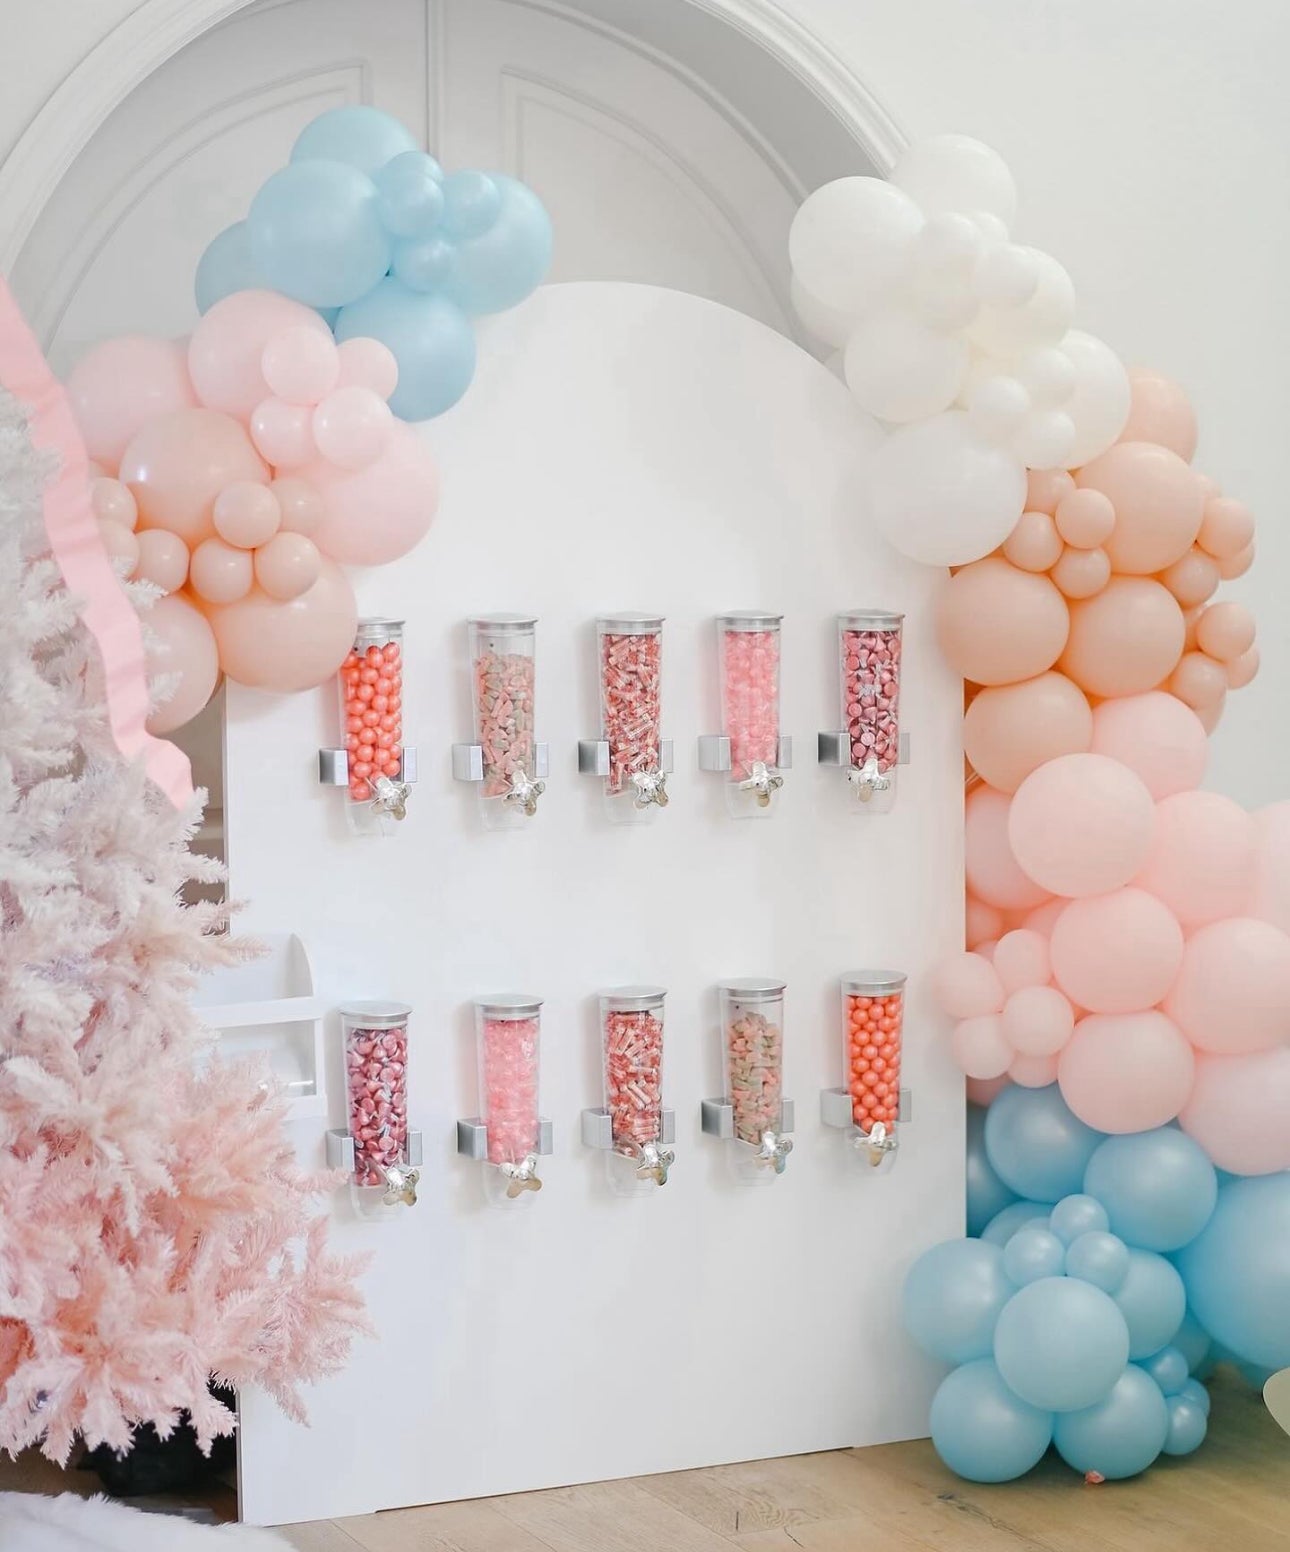 White Candy/Treat Wall Backdrop FOR RENT NJ/NY Only